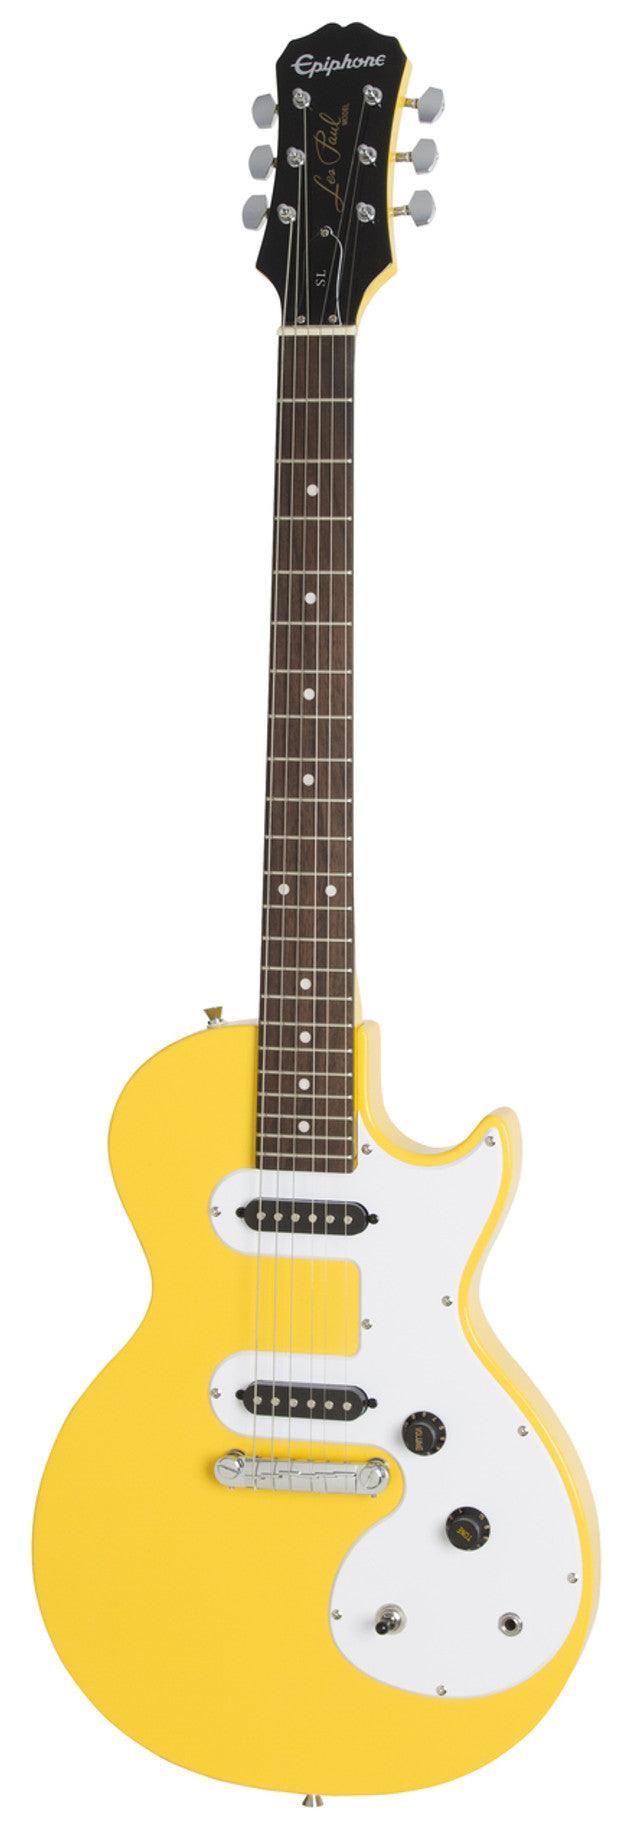 Epiphone Les Paul Melody Maker E1 Sunset Yellow - Guitars - Electric by Epiphone at Muso's Stuff